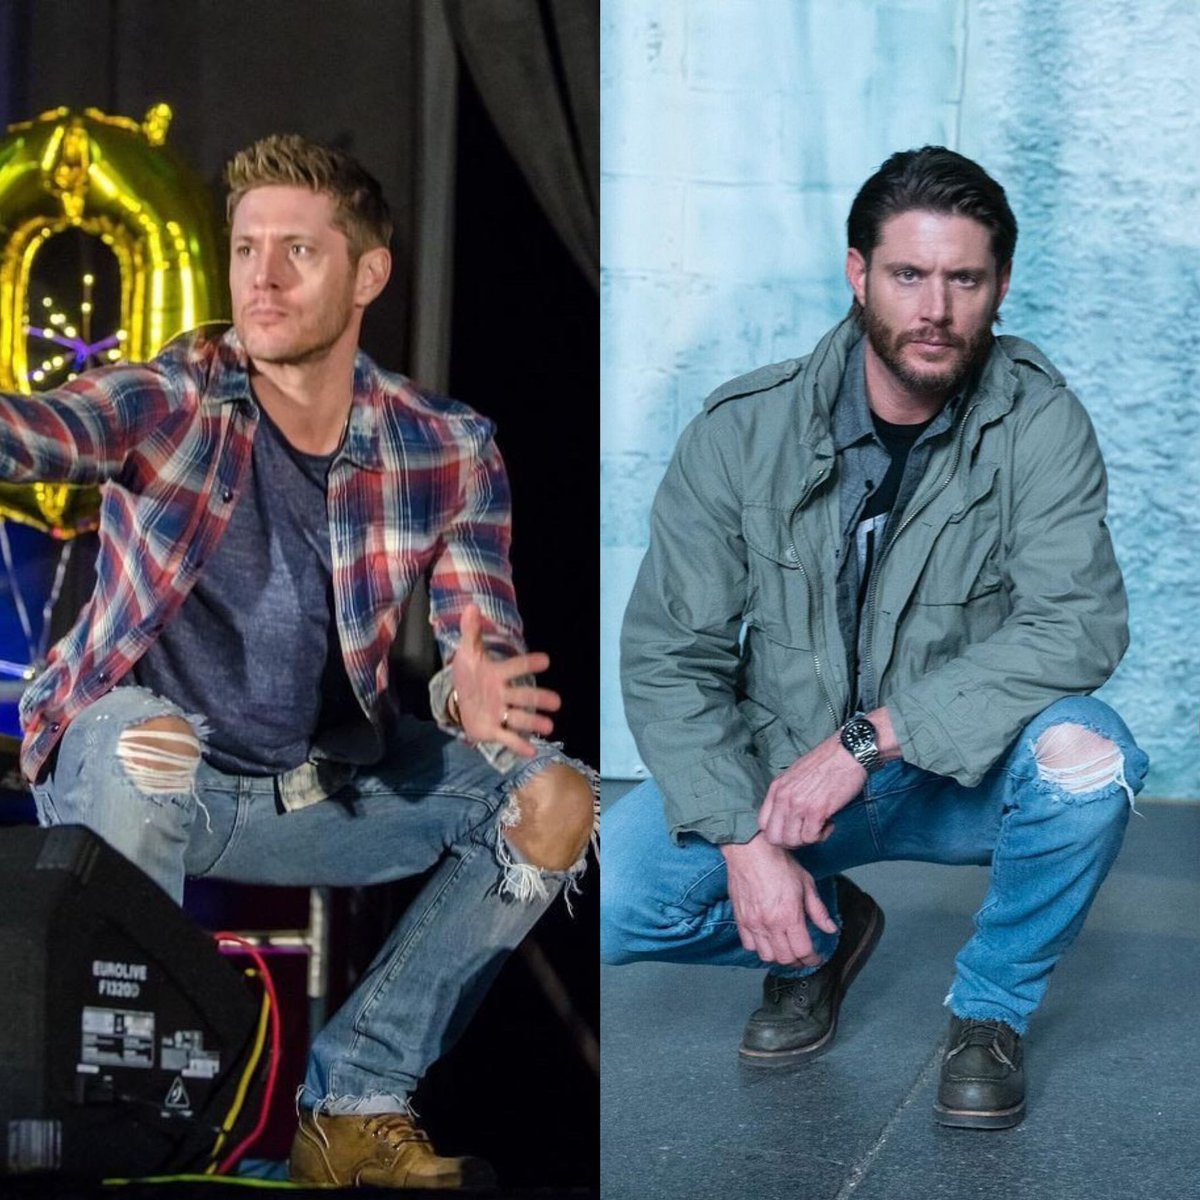 Jensen and the ripped jeans 🫠
#JensenAckles #AcklesNation #Tracker